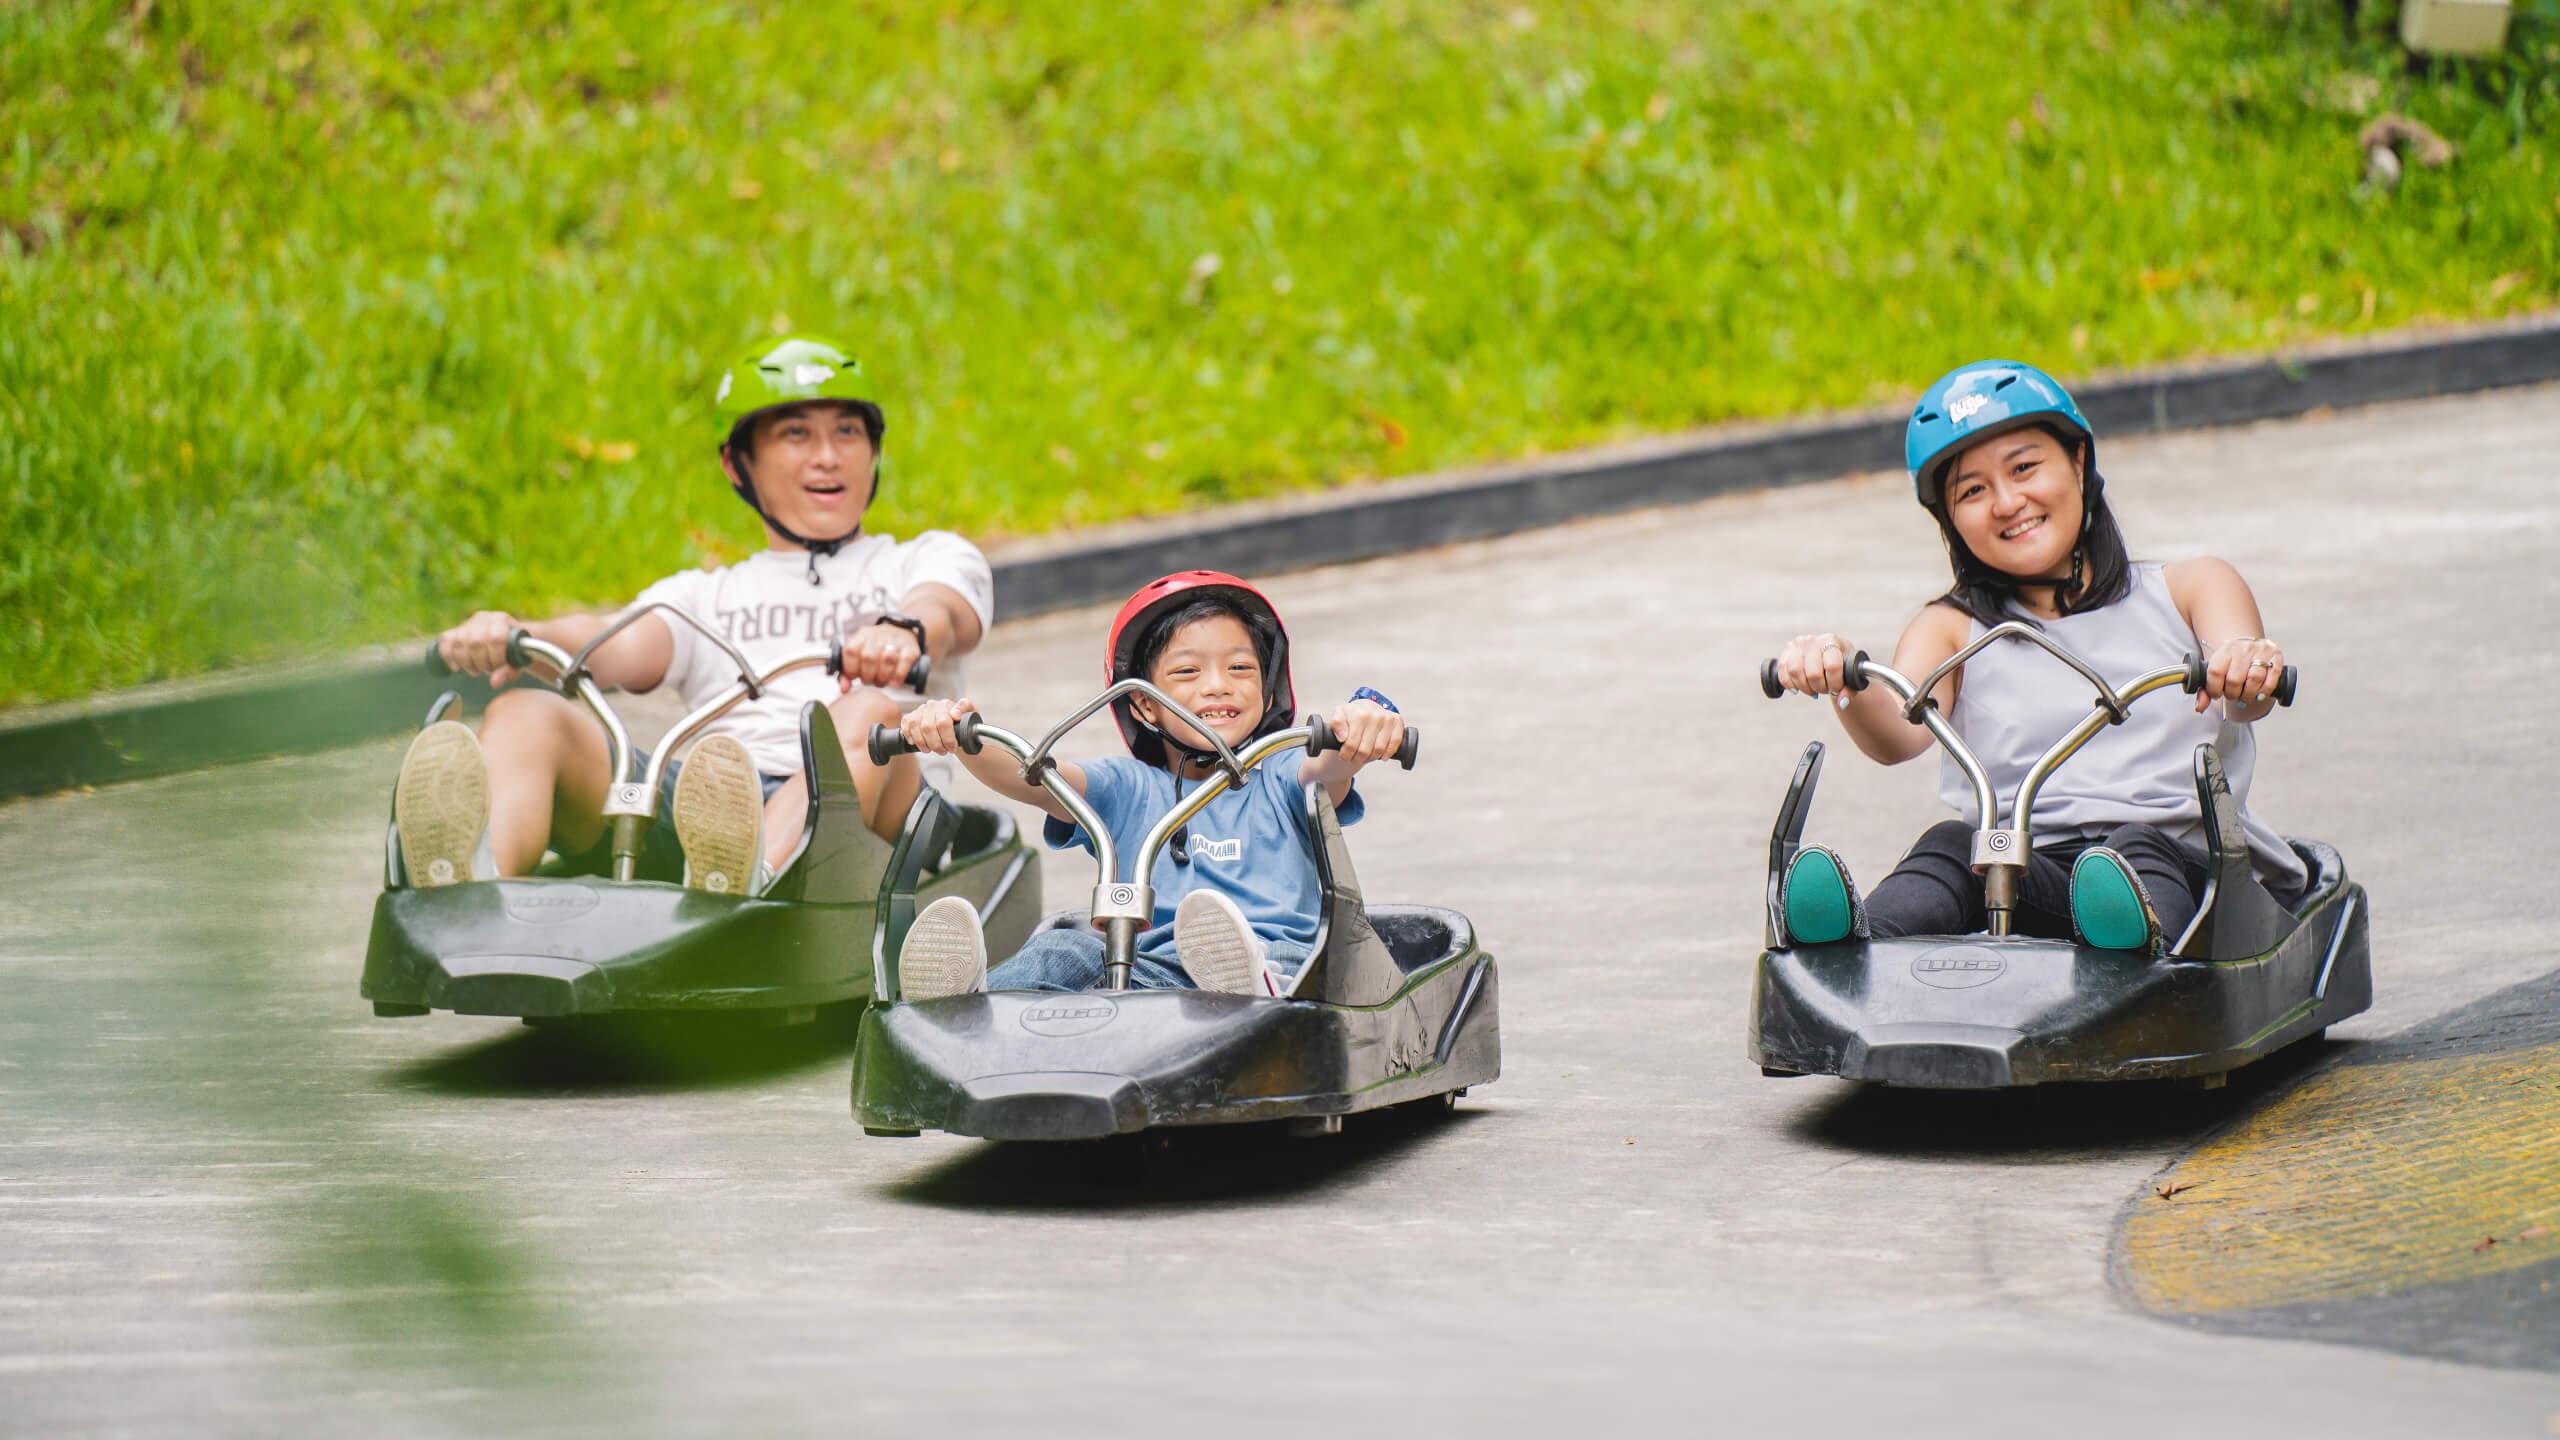 A family rides down the Luge together.